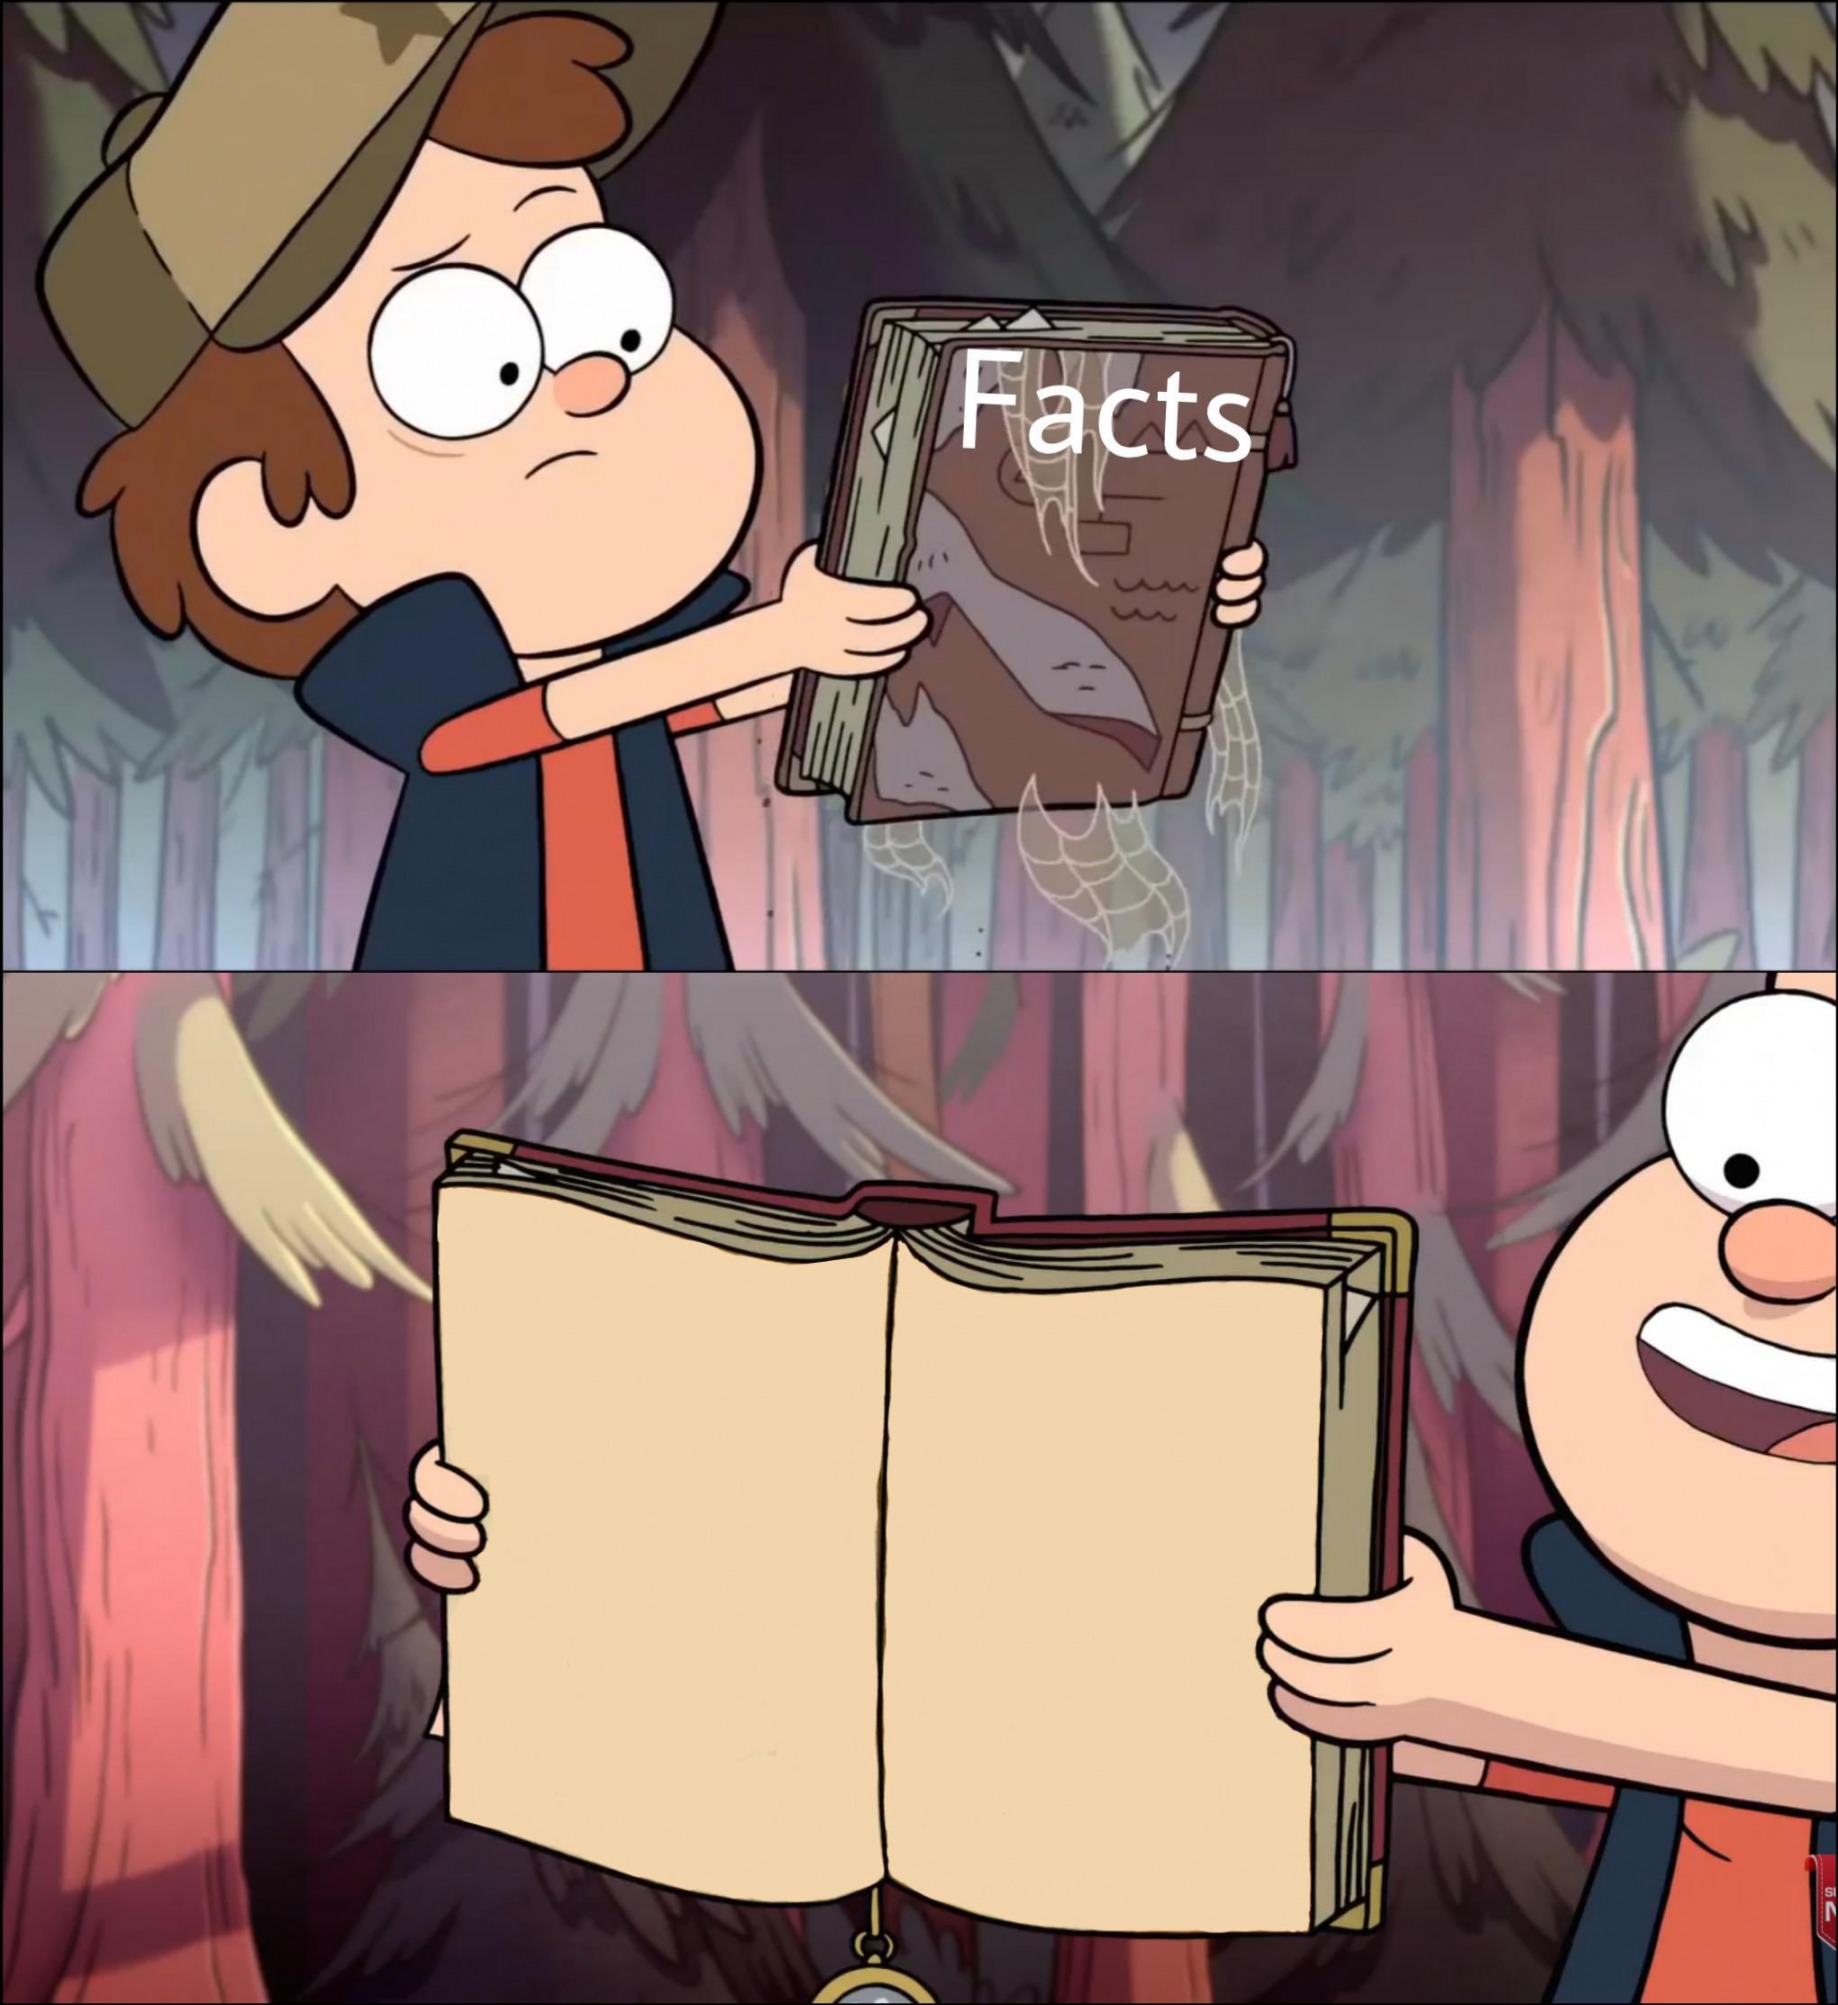 gravity-falls-facts-book-latest-memes-imgflip